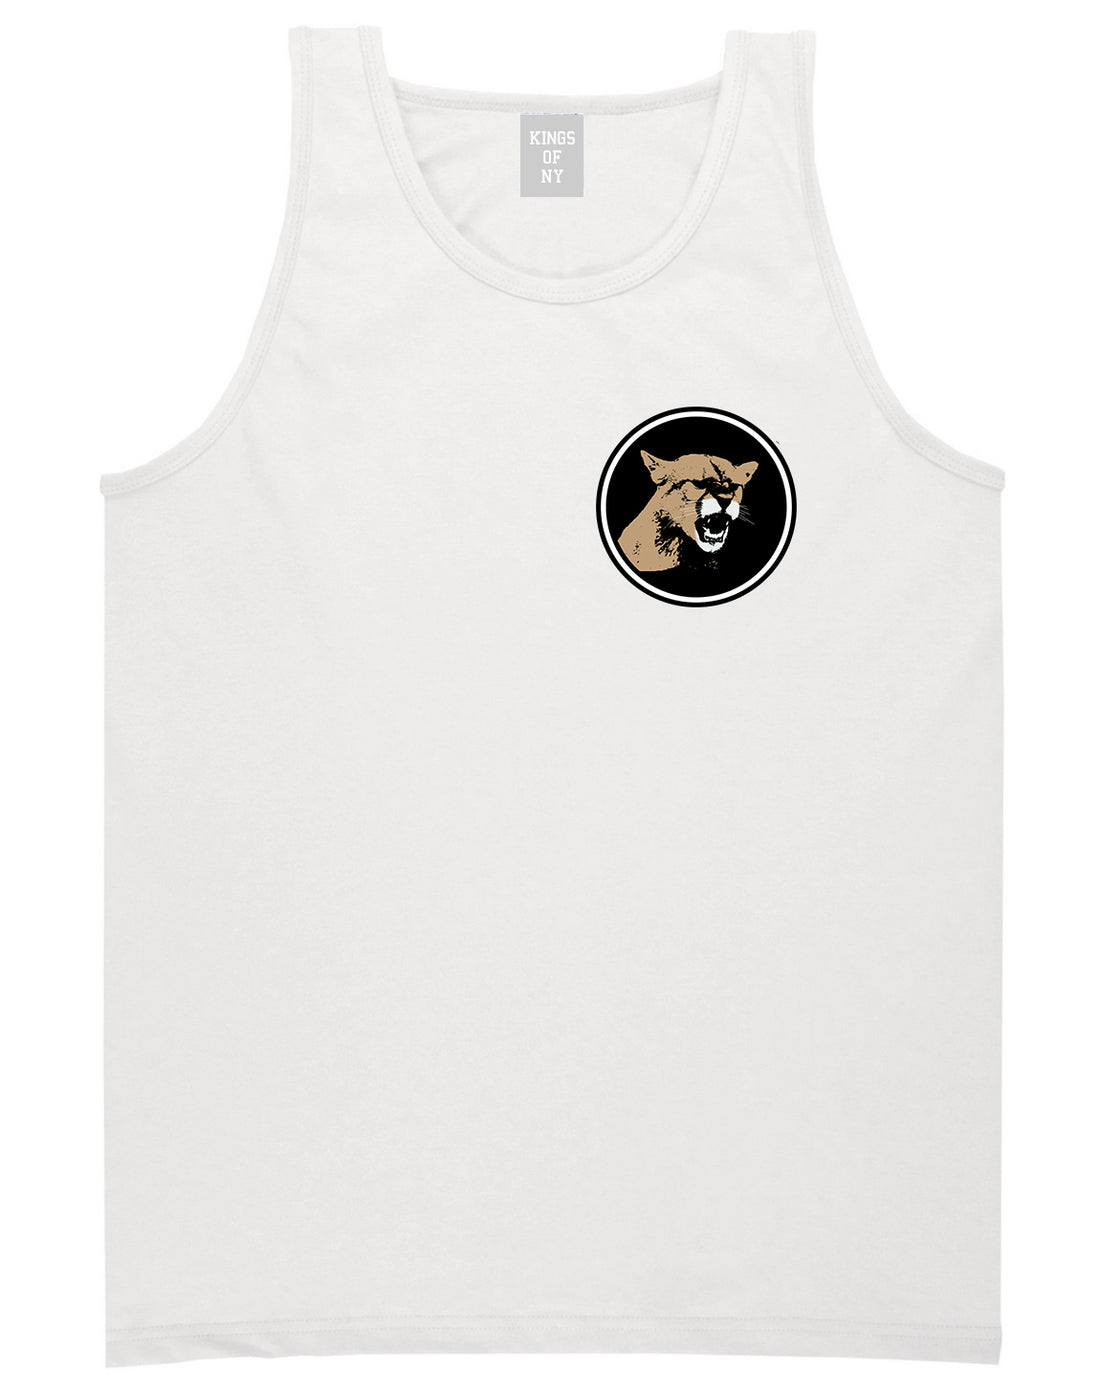 Angry Cougar Chest White Tank Top Shirt by Kings Of NY